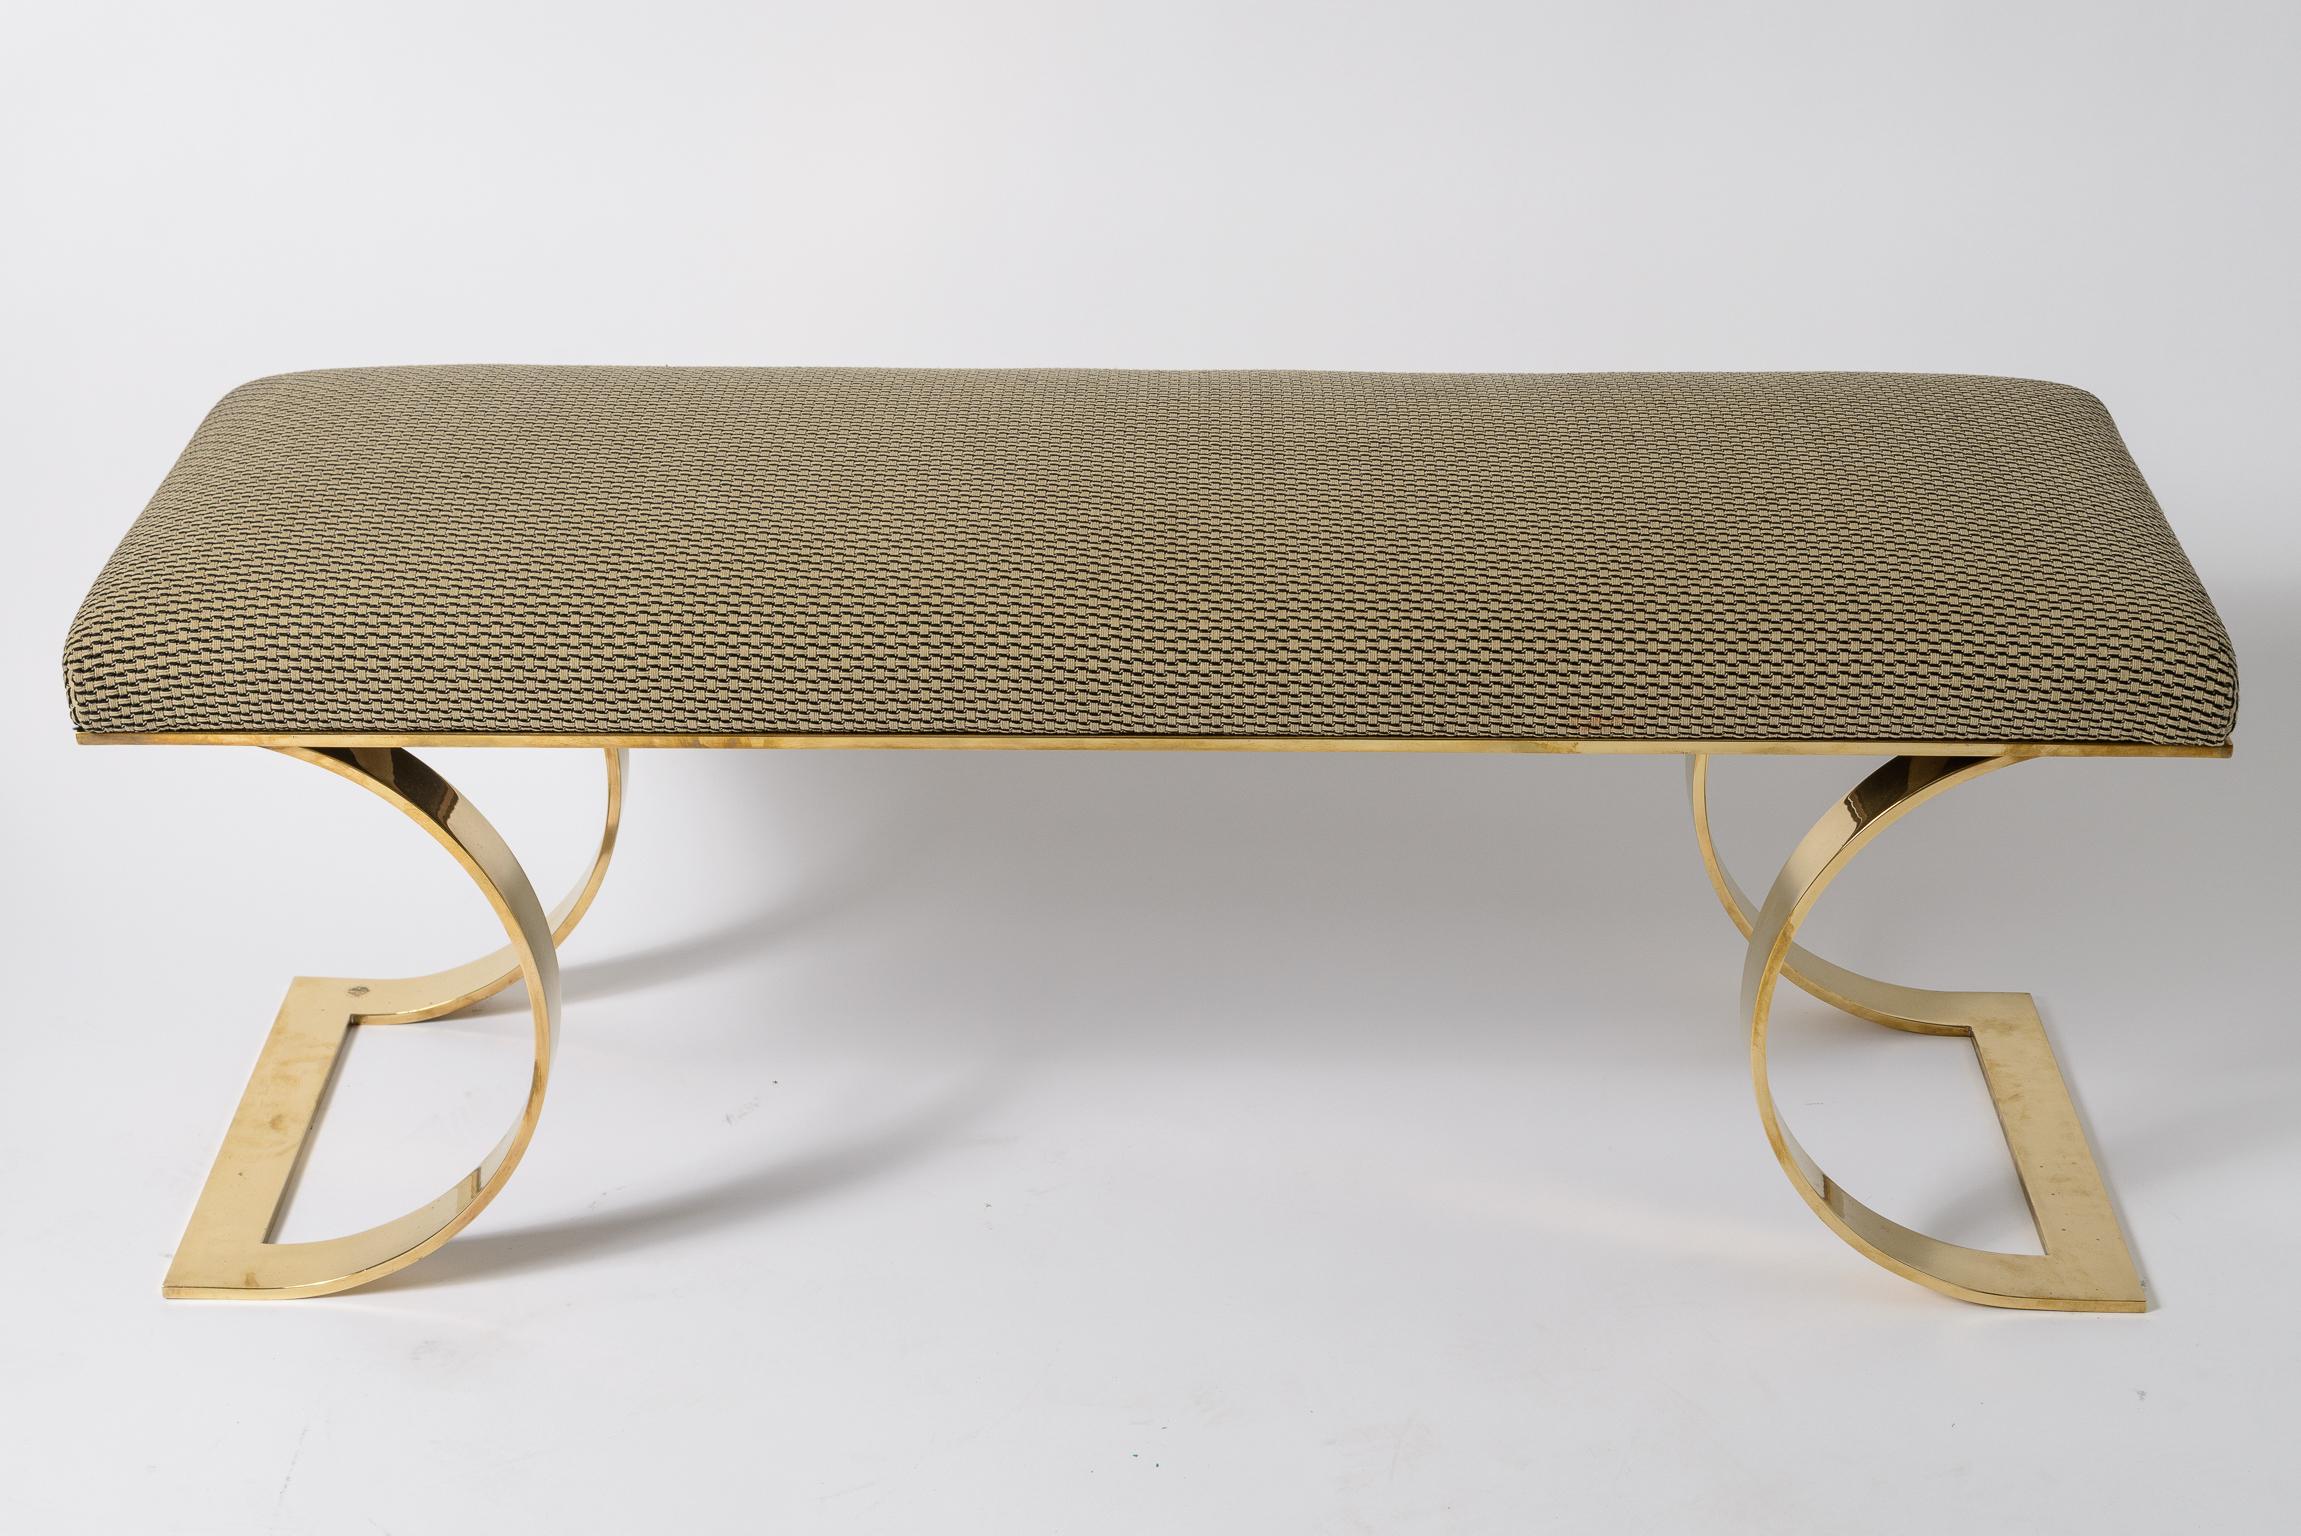 Karl Springer Brass Bench
Original upholstery
A large example of this form